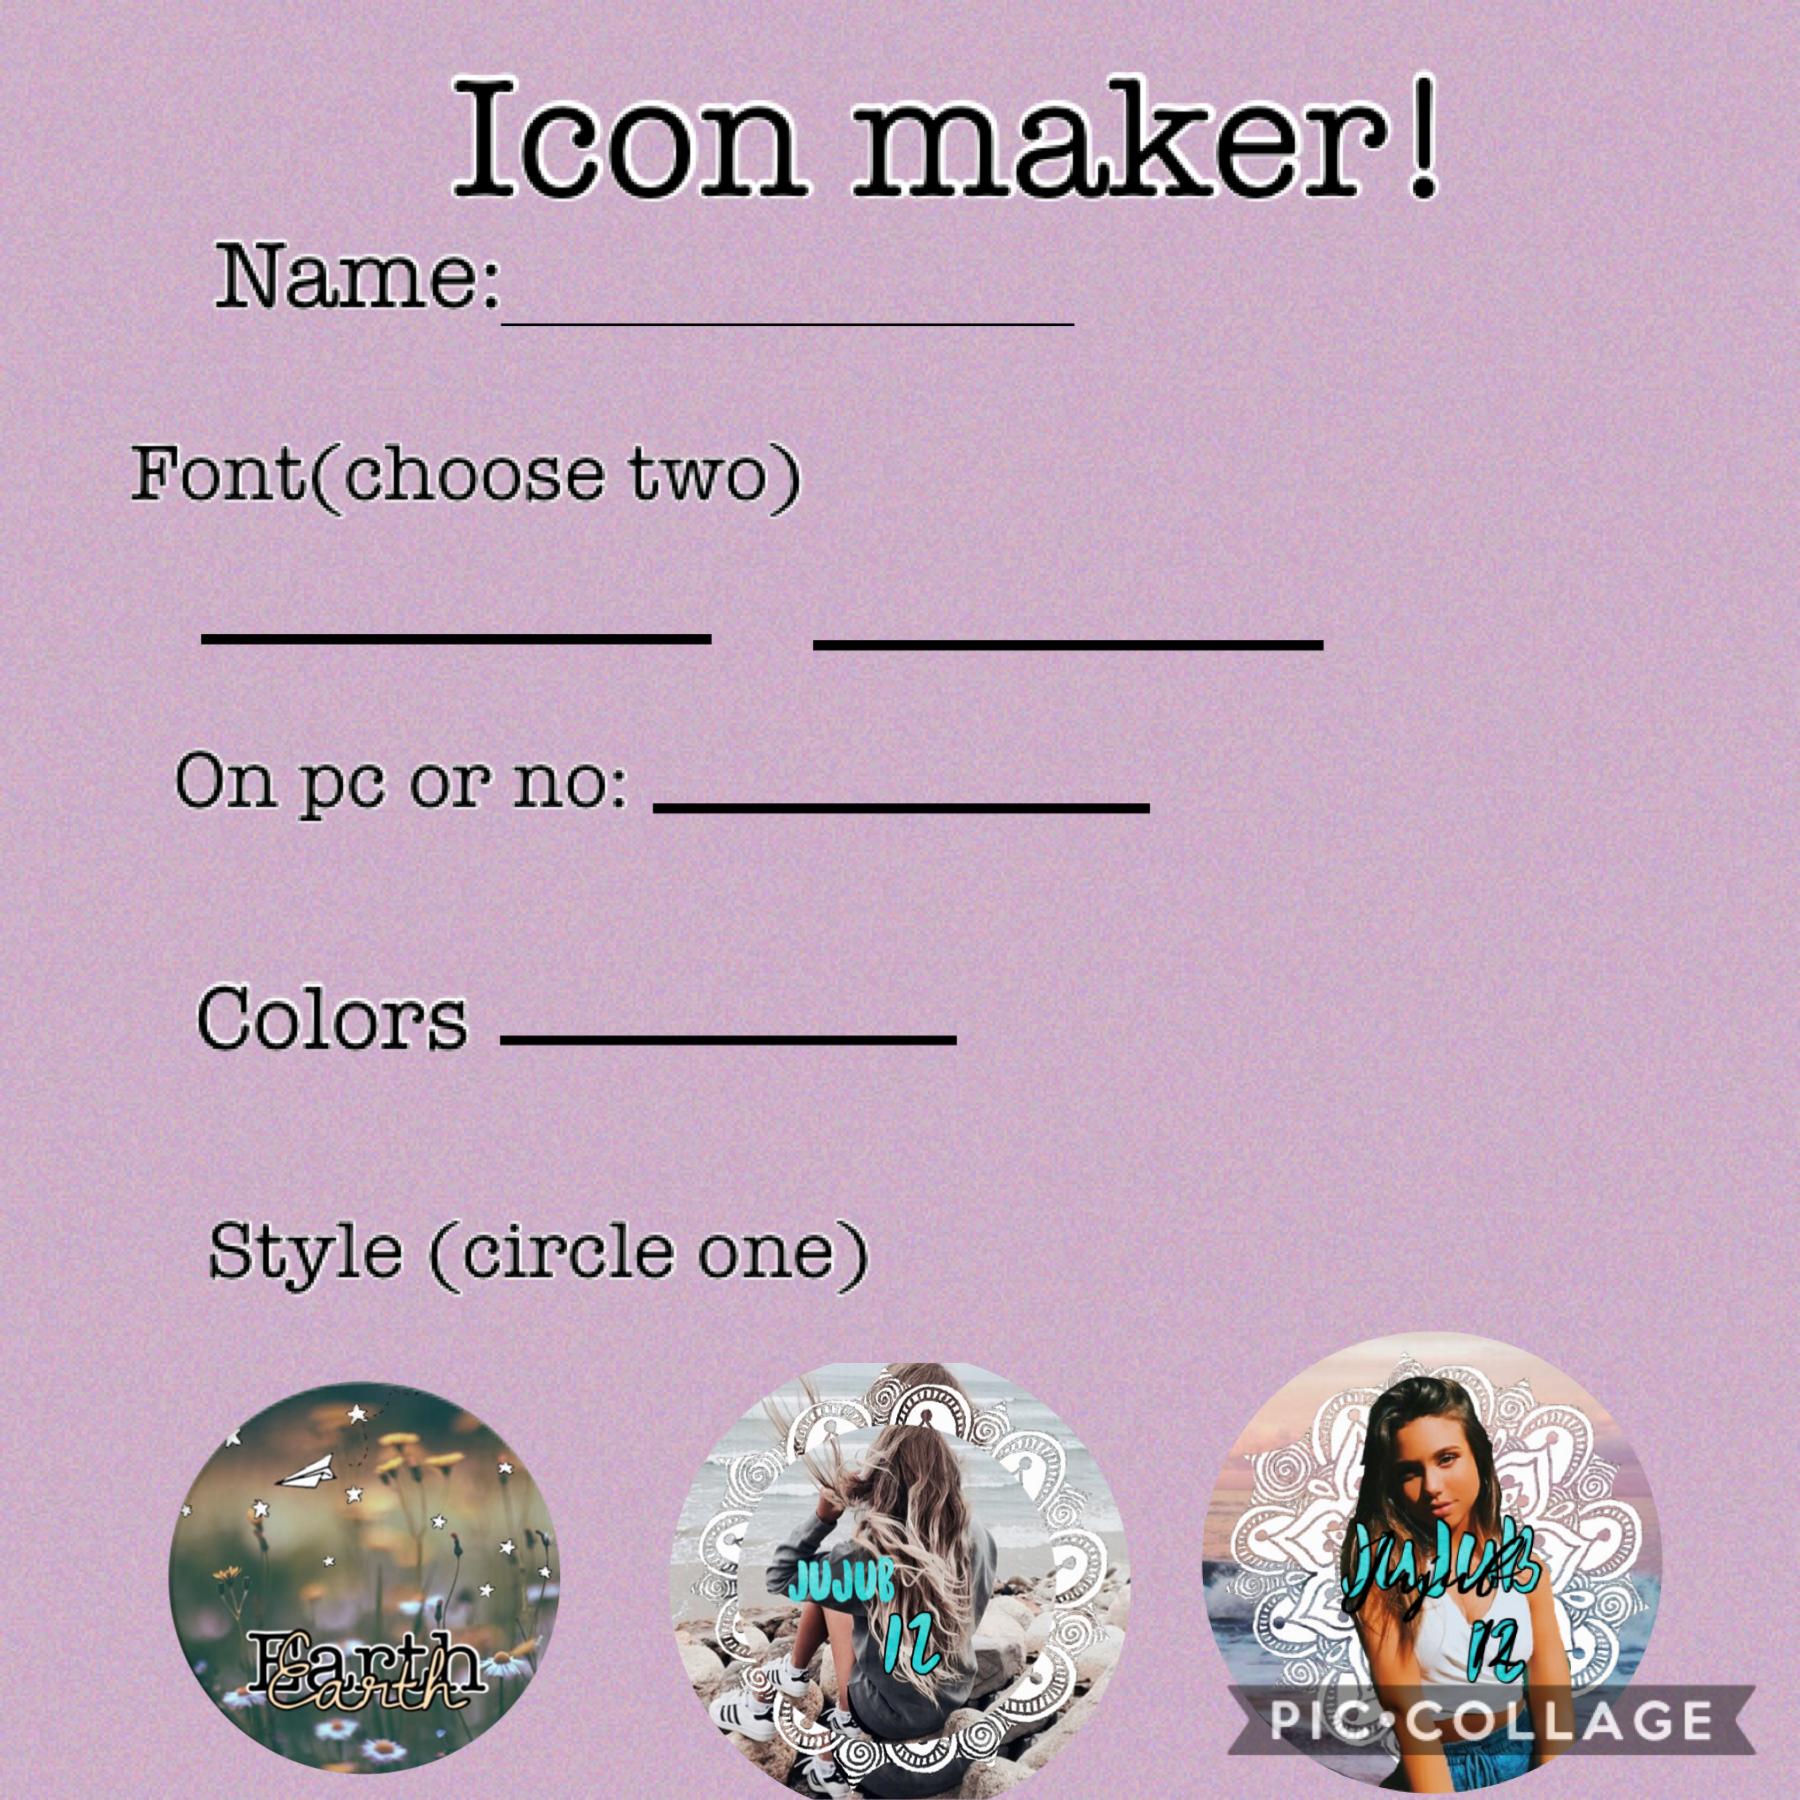 Tap







Fill out the form and I’ll make your icon with a day of you filling it out!